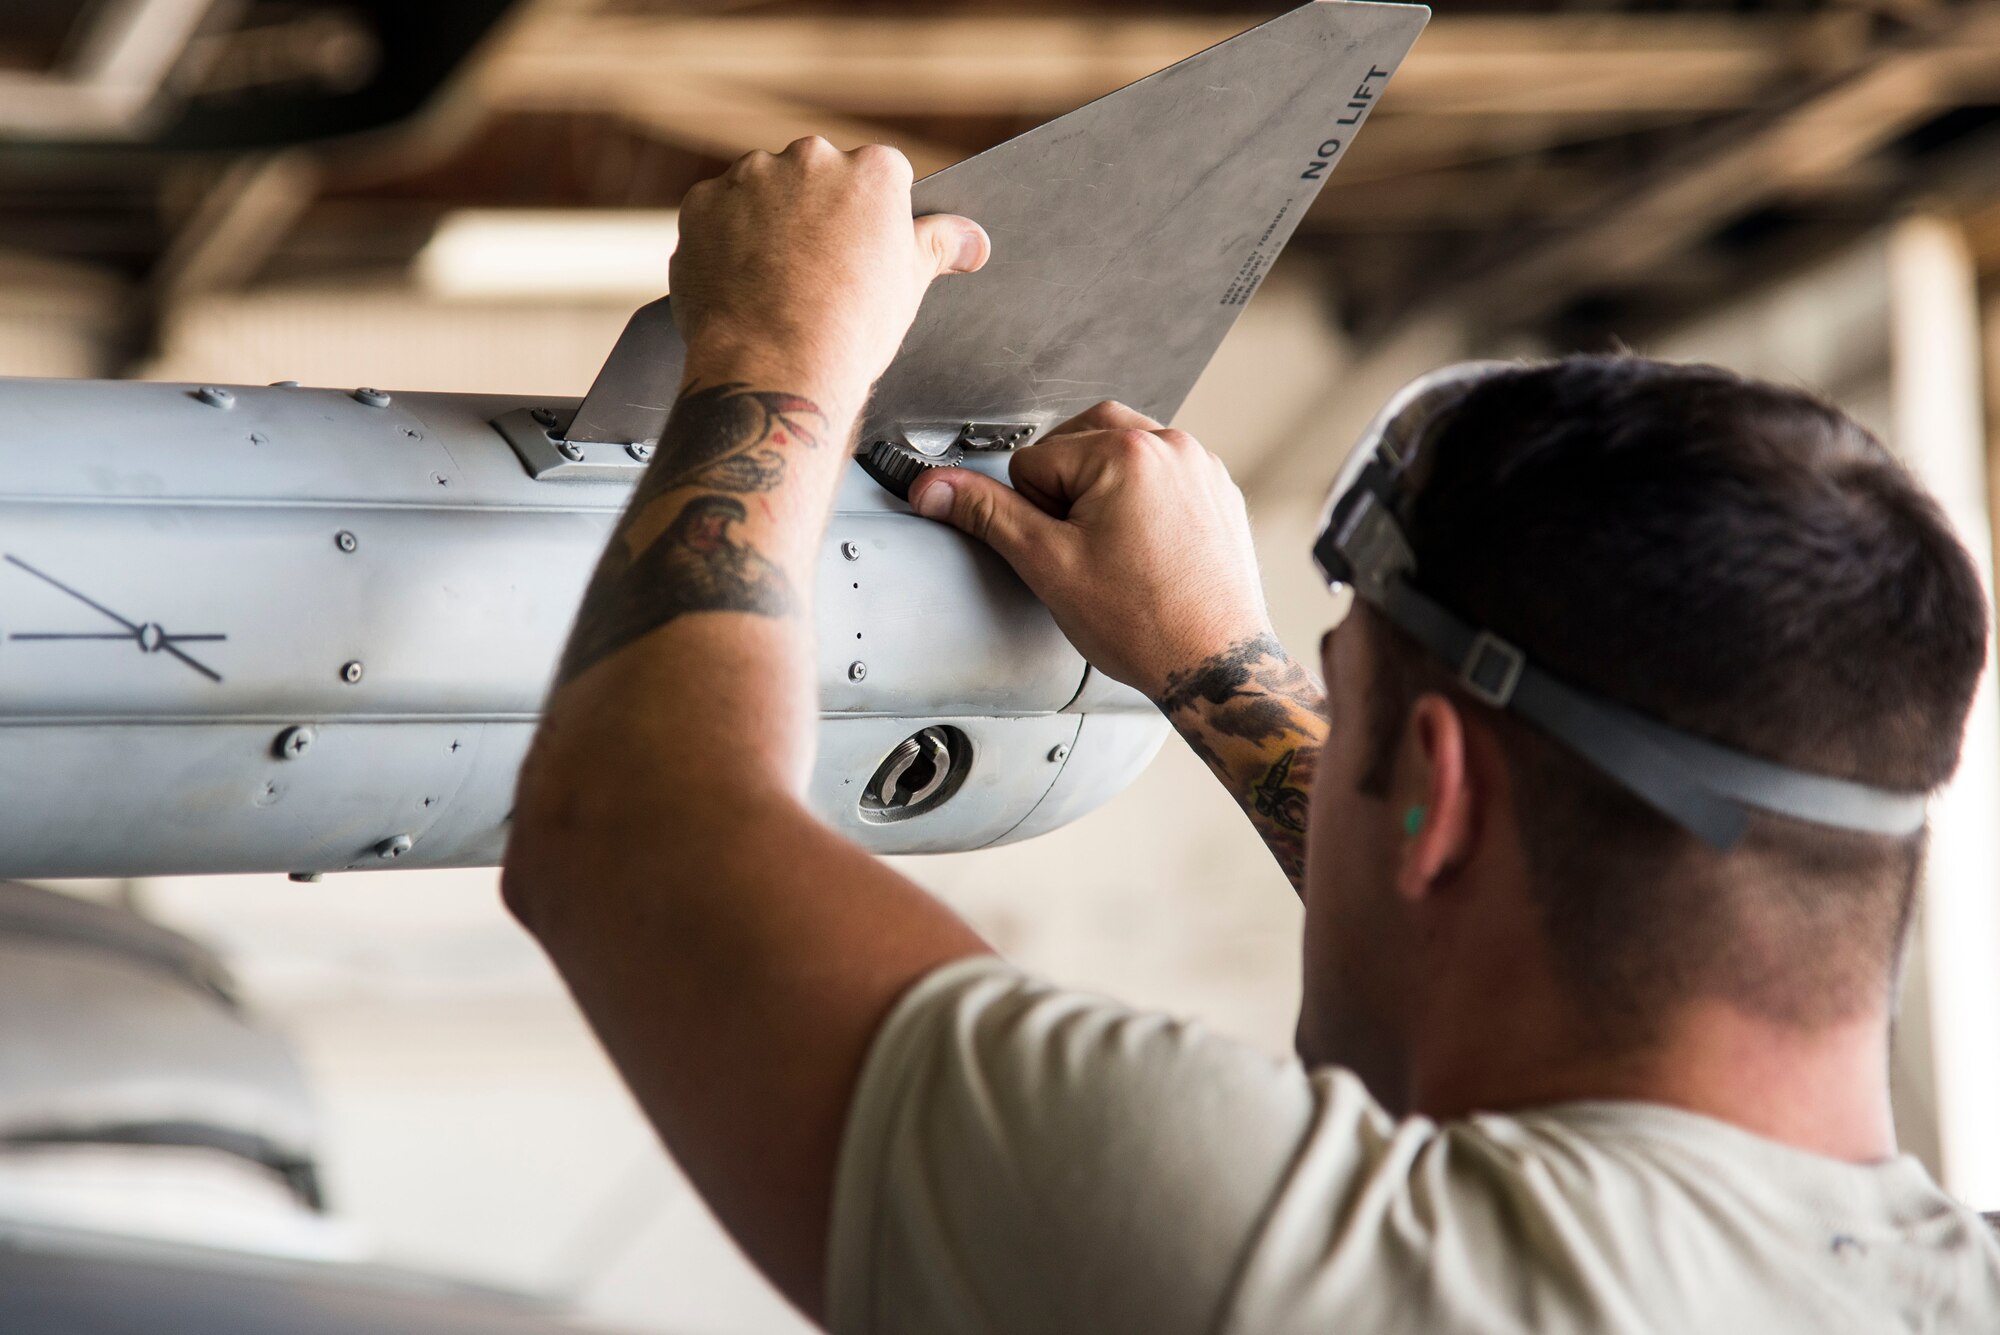 U.S. Air Force Airman 1st Class Andrew Dunkle, 20th Aircraft Maintenance Squadron load crew team member, attaches a fin to an AIM-120 advanced medium-range air-to-air missile during a quarterly load crew competition at Shaw Air Force Base, S.C., Oct. 4, 2017.